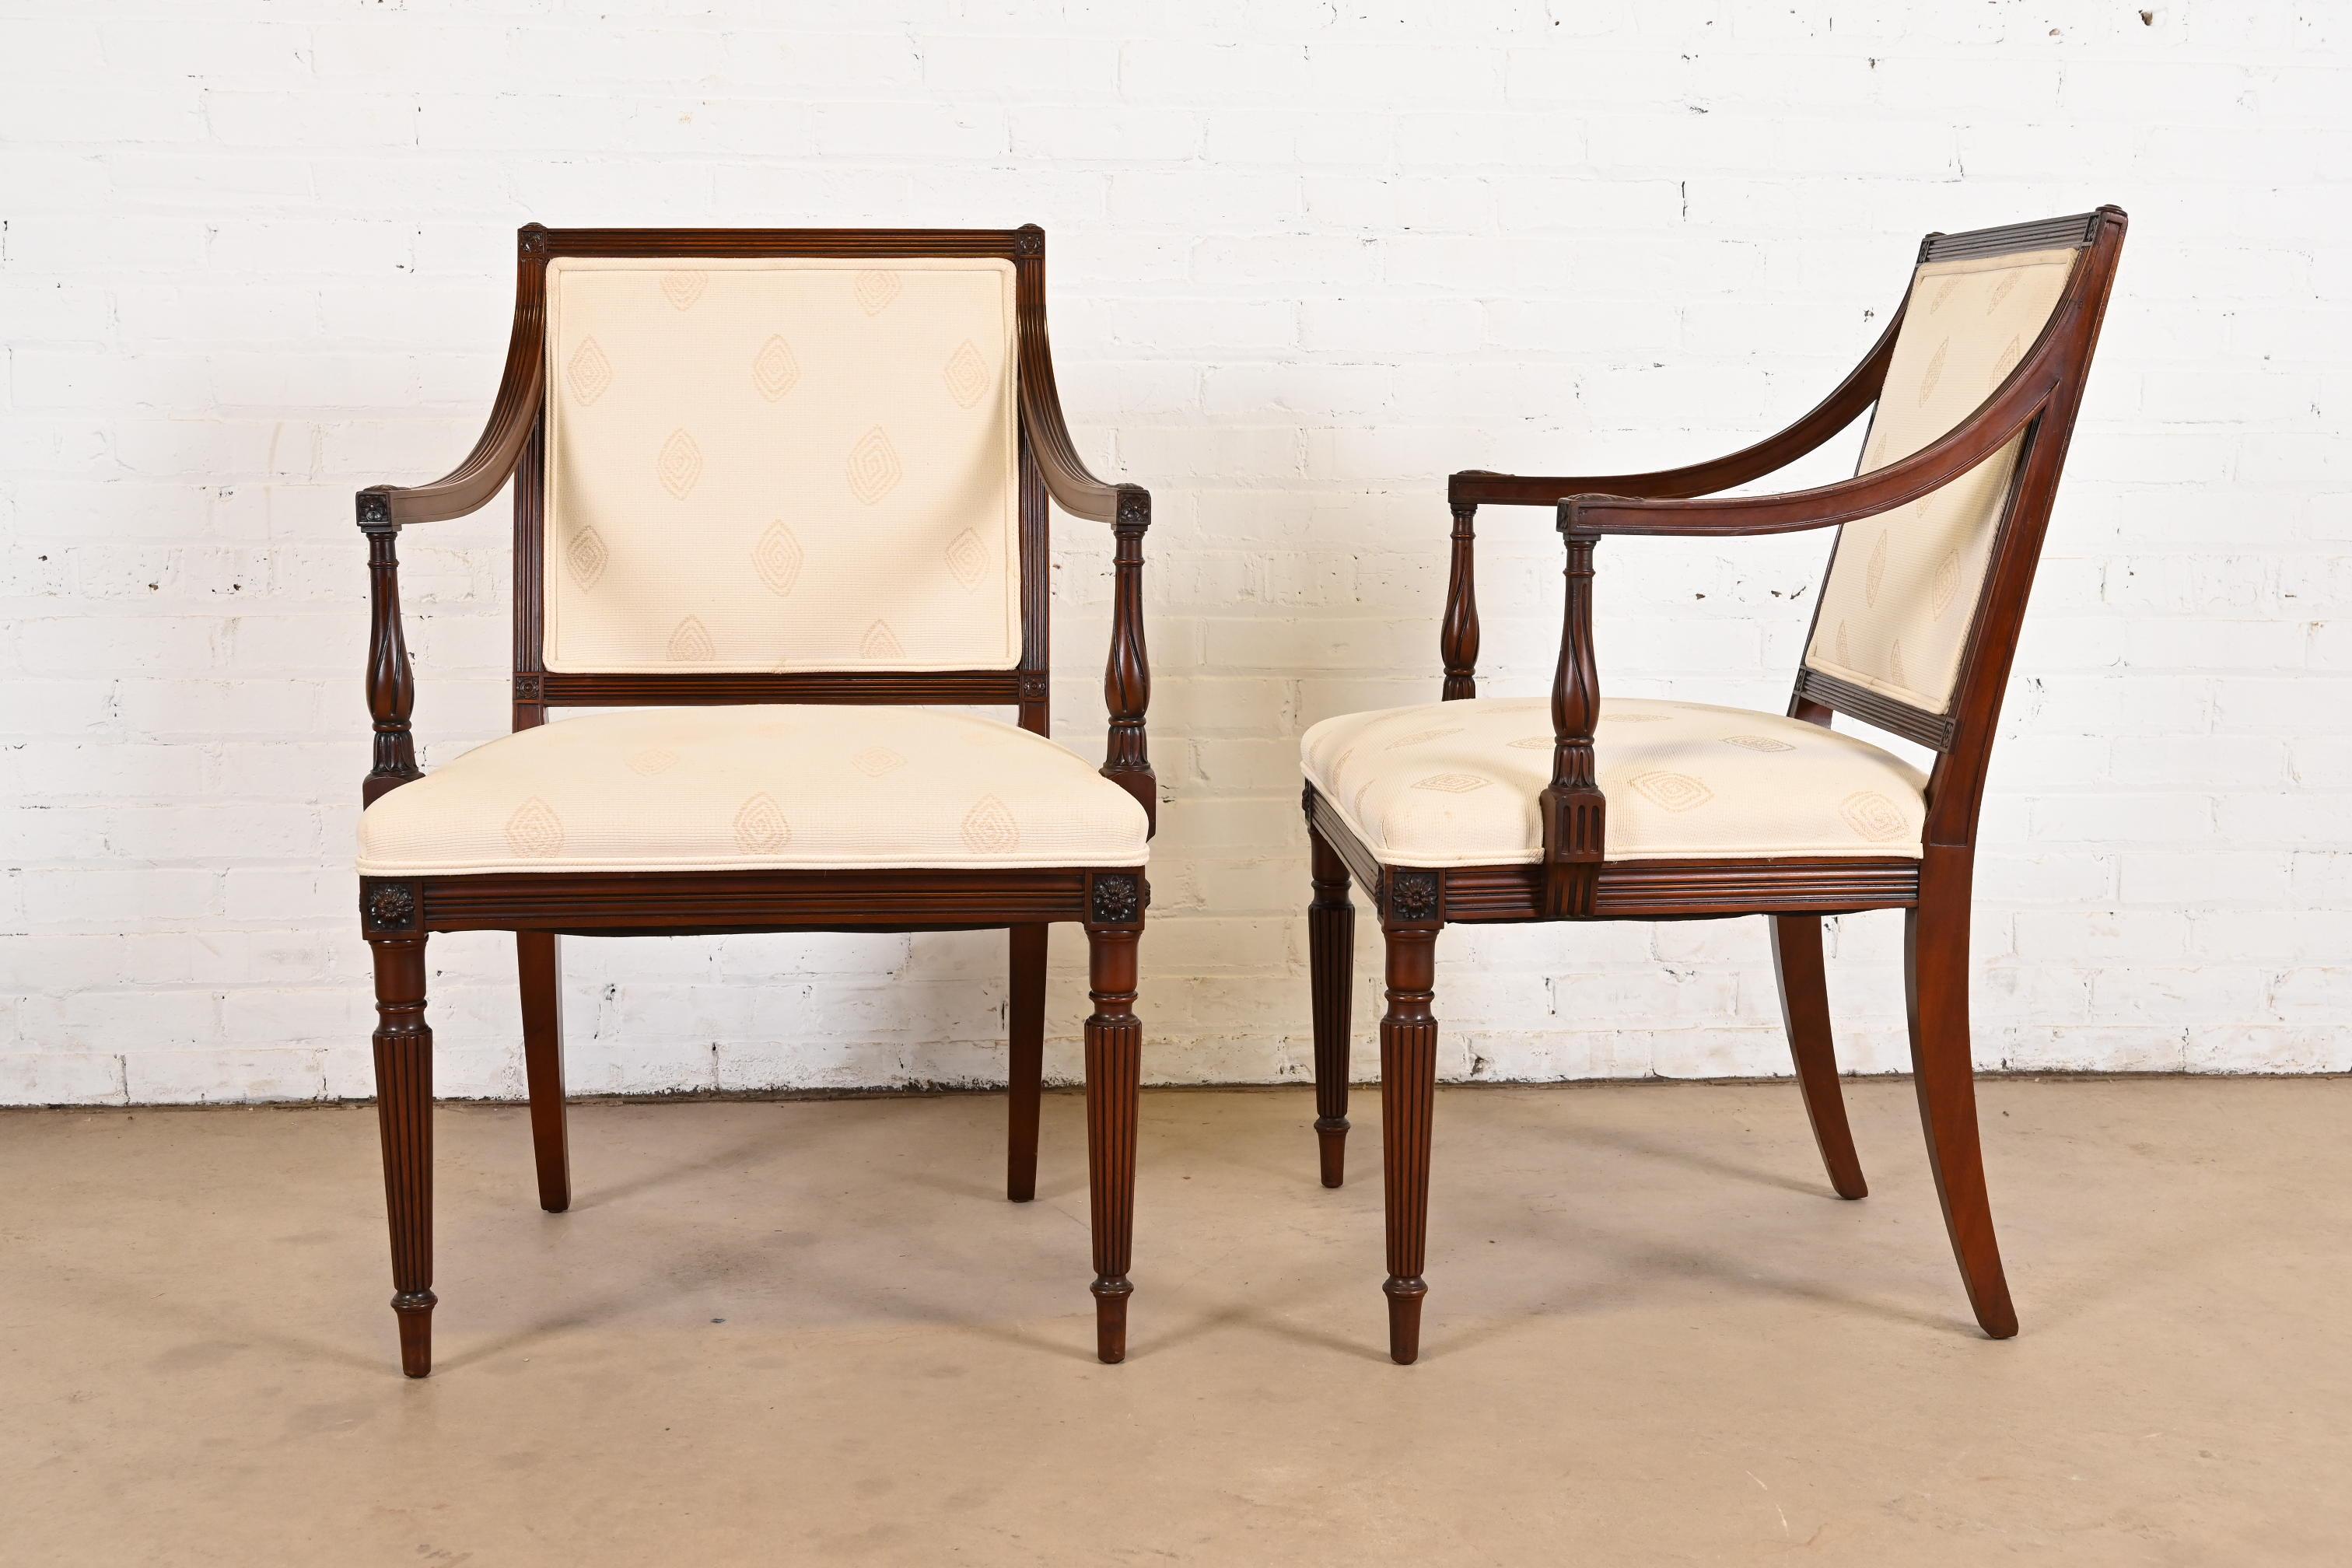 A gorgeous pair of French Regency Louis XVI style fauteuils or dining arm chairs

In the manner of Henredon

USA, Circa 1980s

Sculpted solid mahogany frames, with upholstered seats and backs.

Measures: 23.5